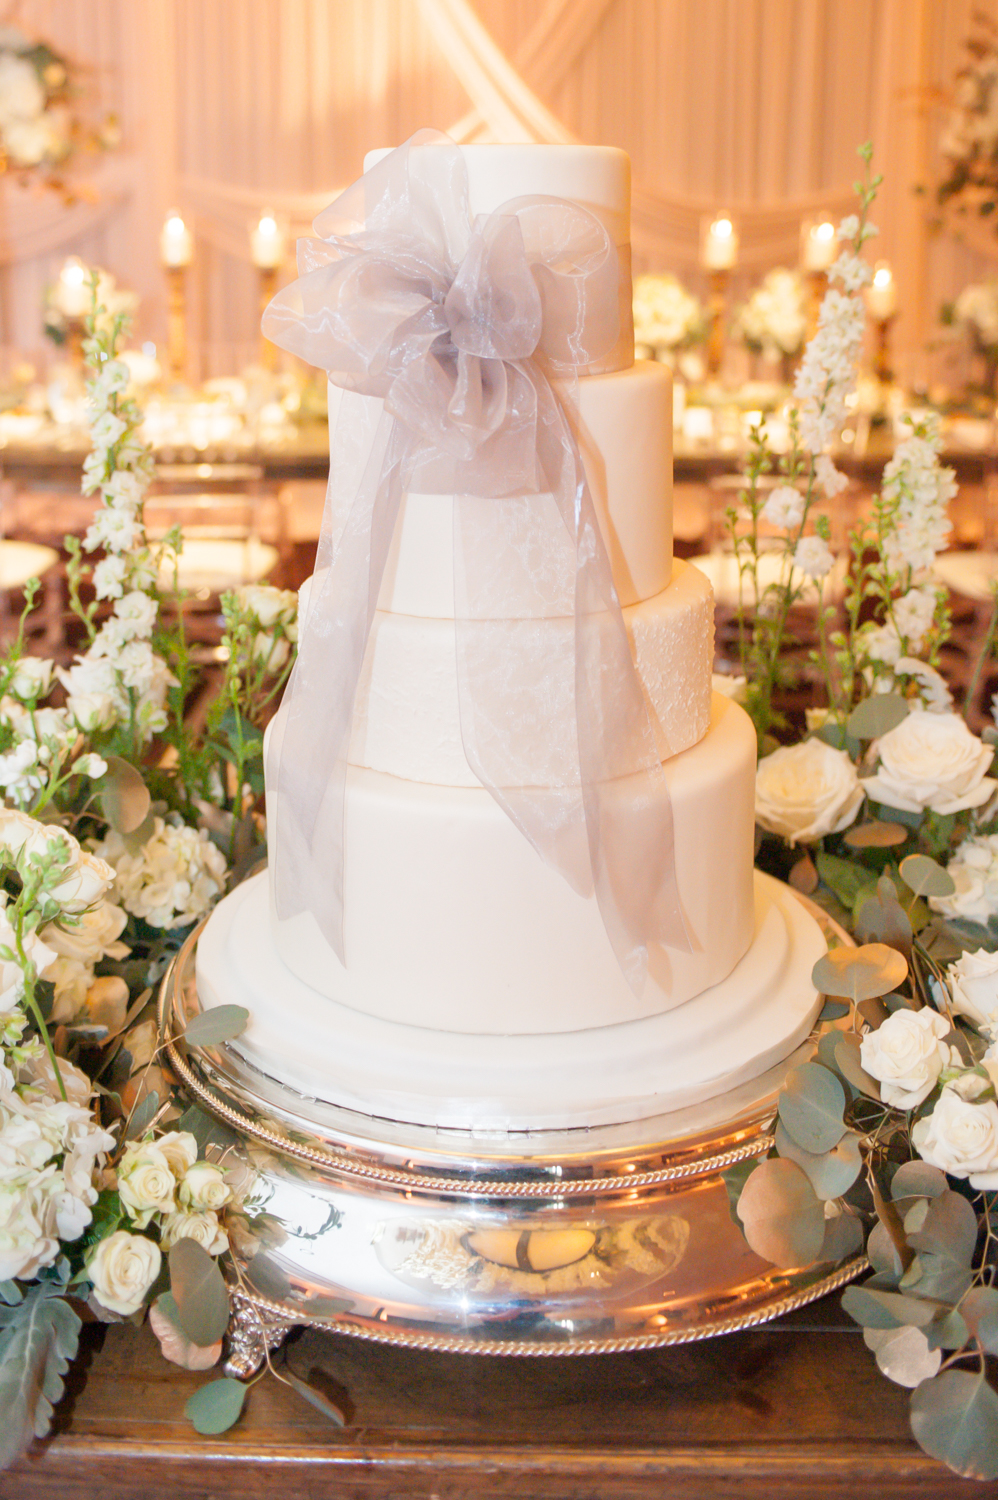 Events Floral Simply, Gwen Hotel Chicago wedding cake